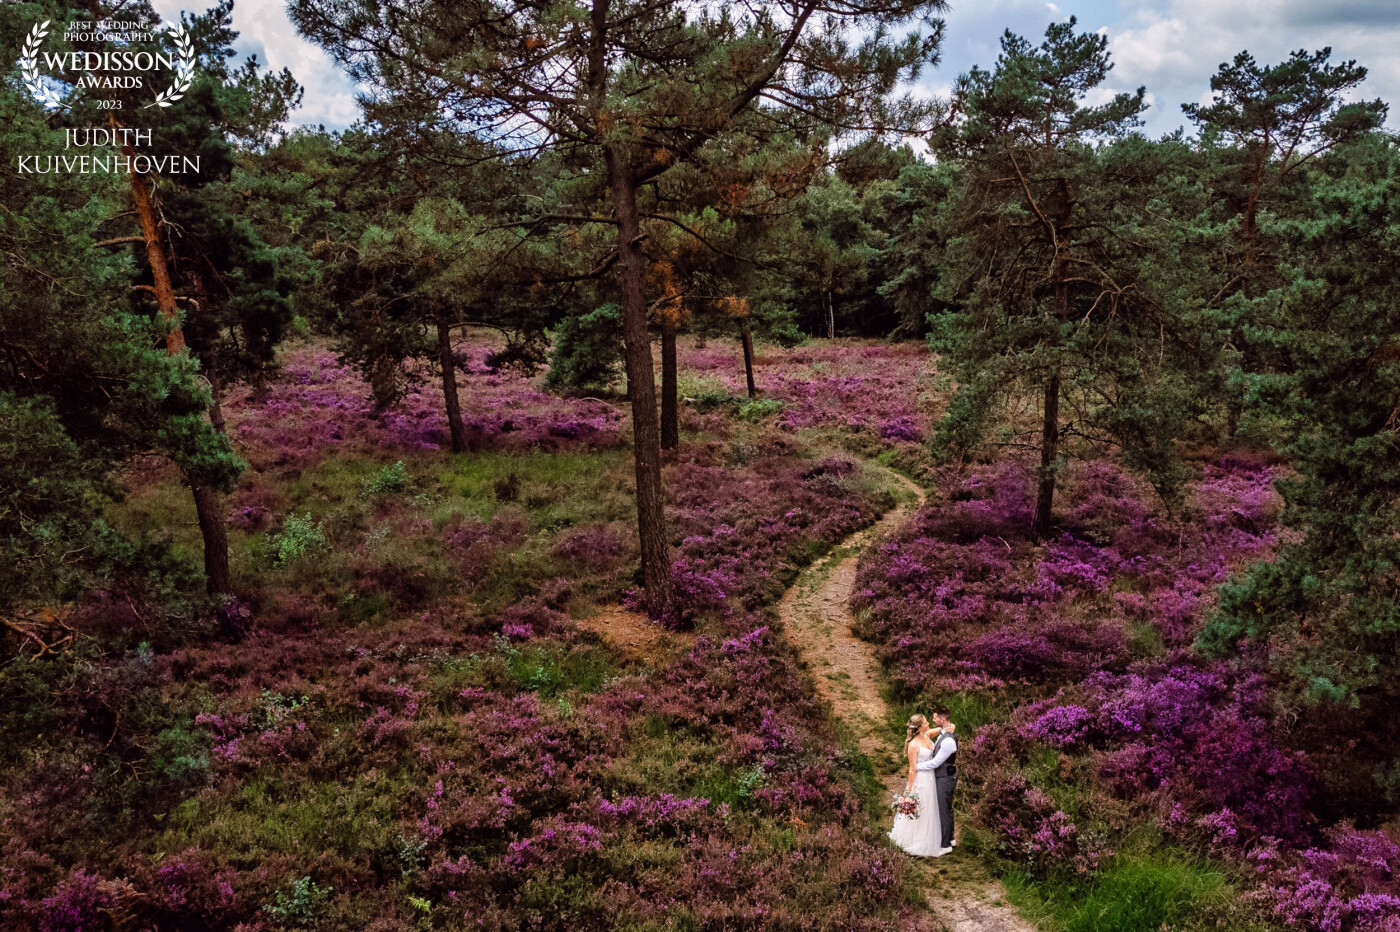 When this beautiful couple got married, the heath looked amazing! I wanted to show the beautiful colors of the blue sky, the green trees and the purple heath and I used my drone to make this shot.